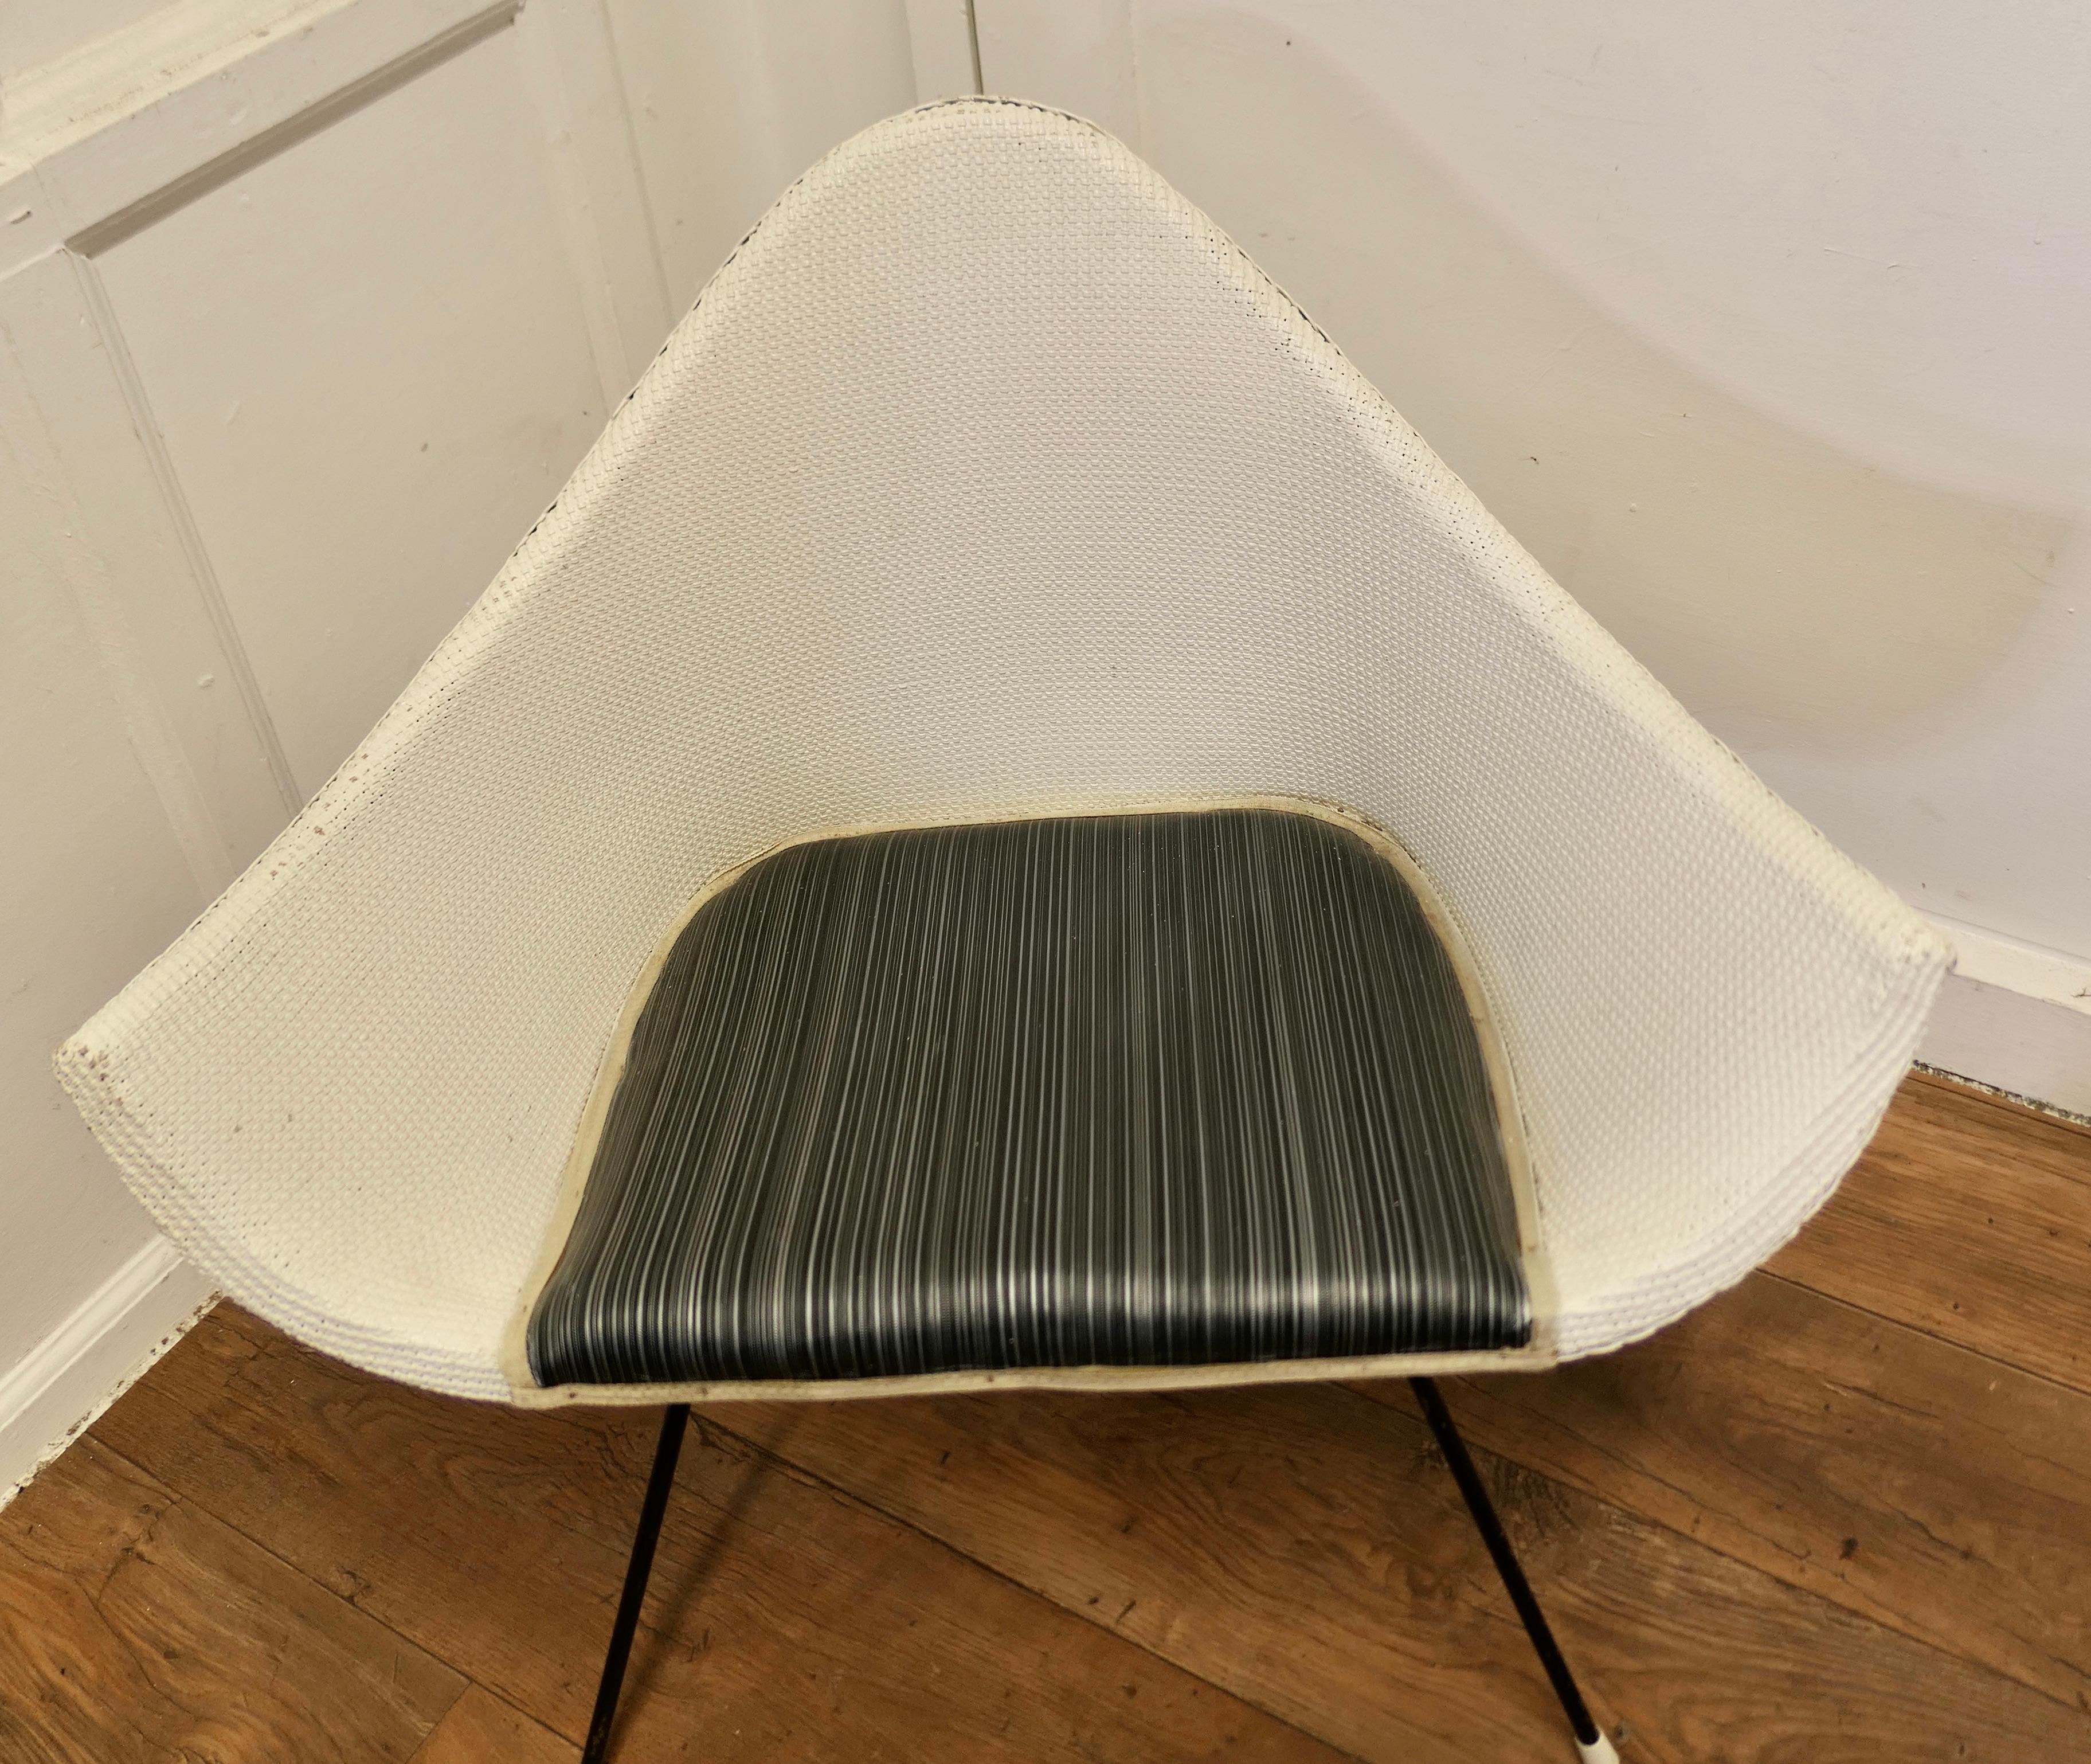 Lloyd Loom 1960s “Stingray” Retro Arm Chair   A Quirky statement piece of its ti For Sale 2